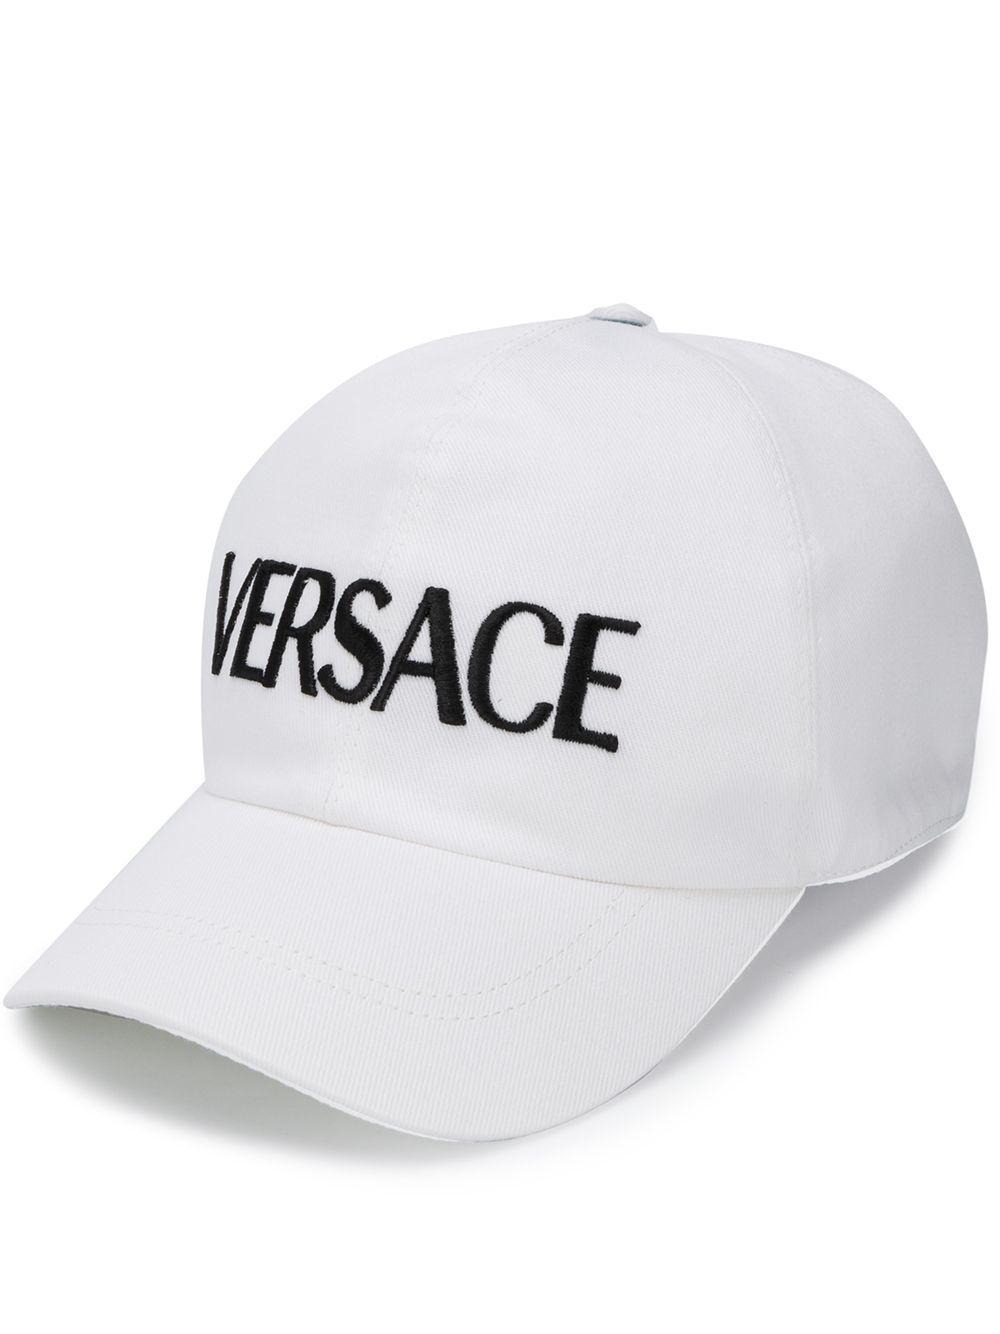 Versace Cotton Logo-embroidered Baseball Cap in White for Men - Lyst